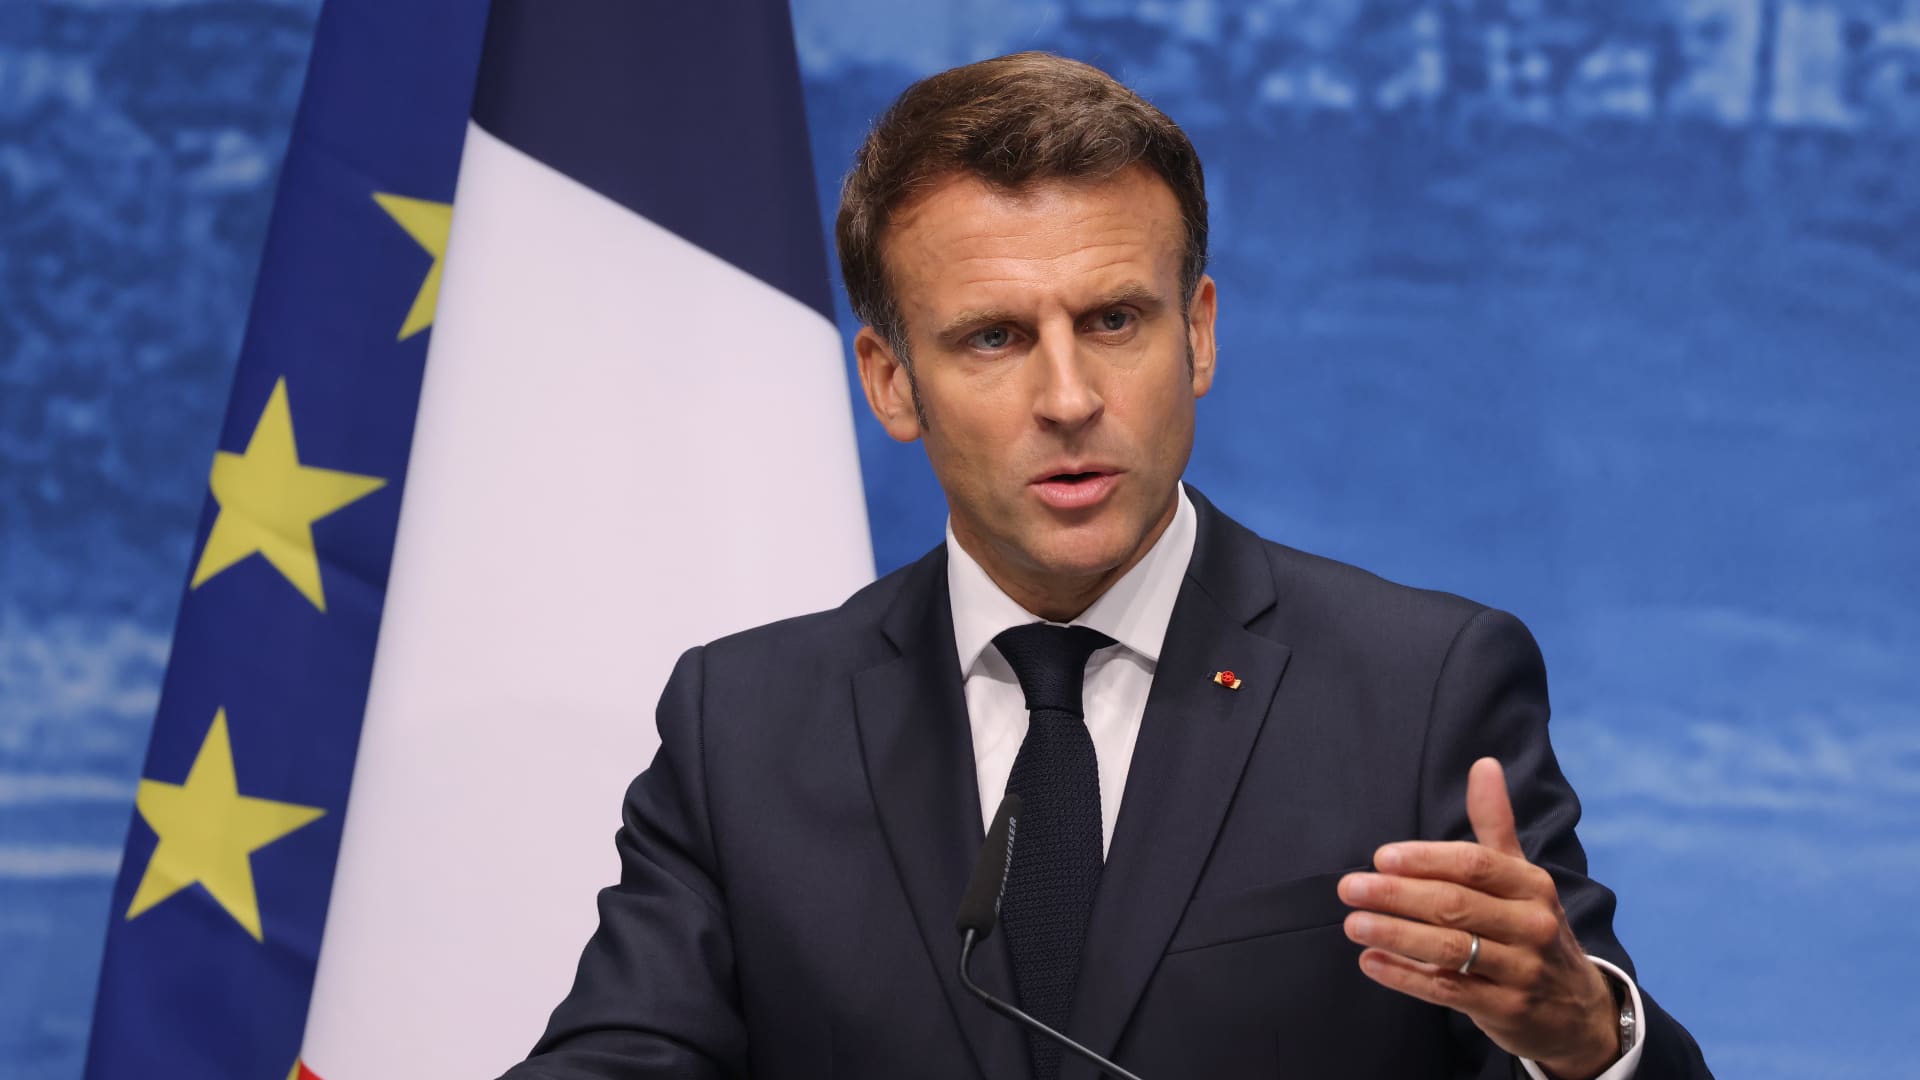 French President Emmanuel Macron says he's in favor of a price cap on Russian oil as he speaks to the media on the third and final day of the G7 summit at Schloss Elmau on June 28, 2022 near Garmisch-Partenkirchen, Germany.